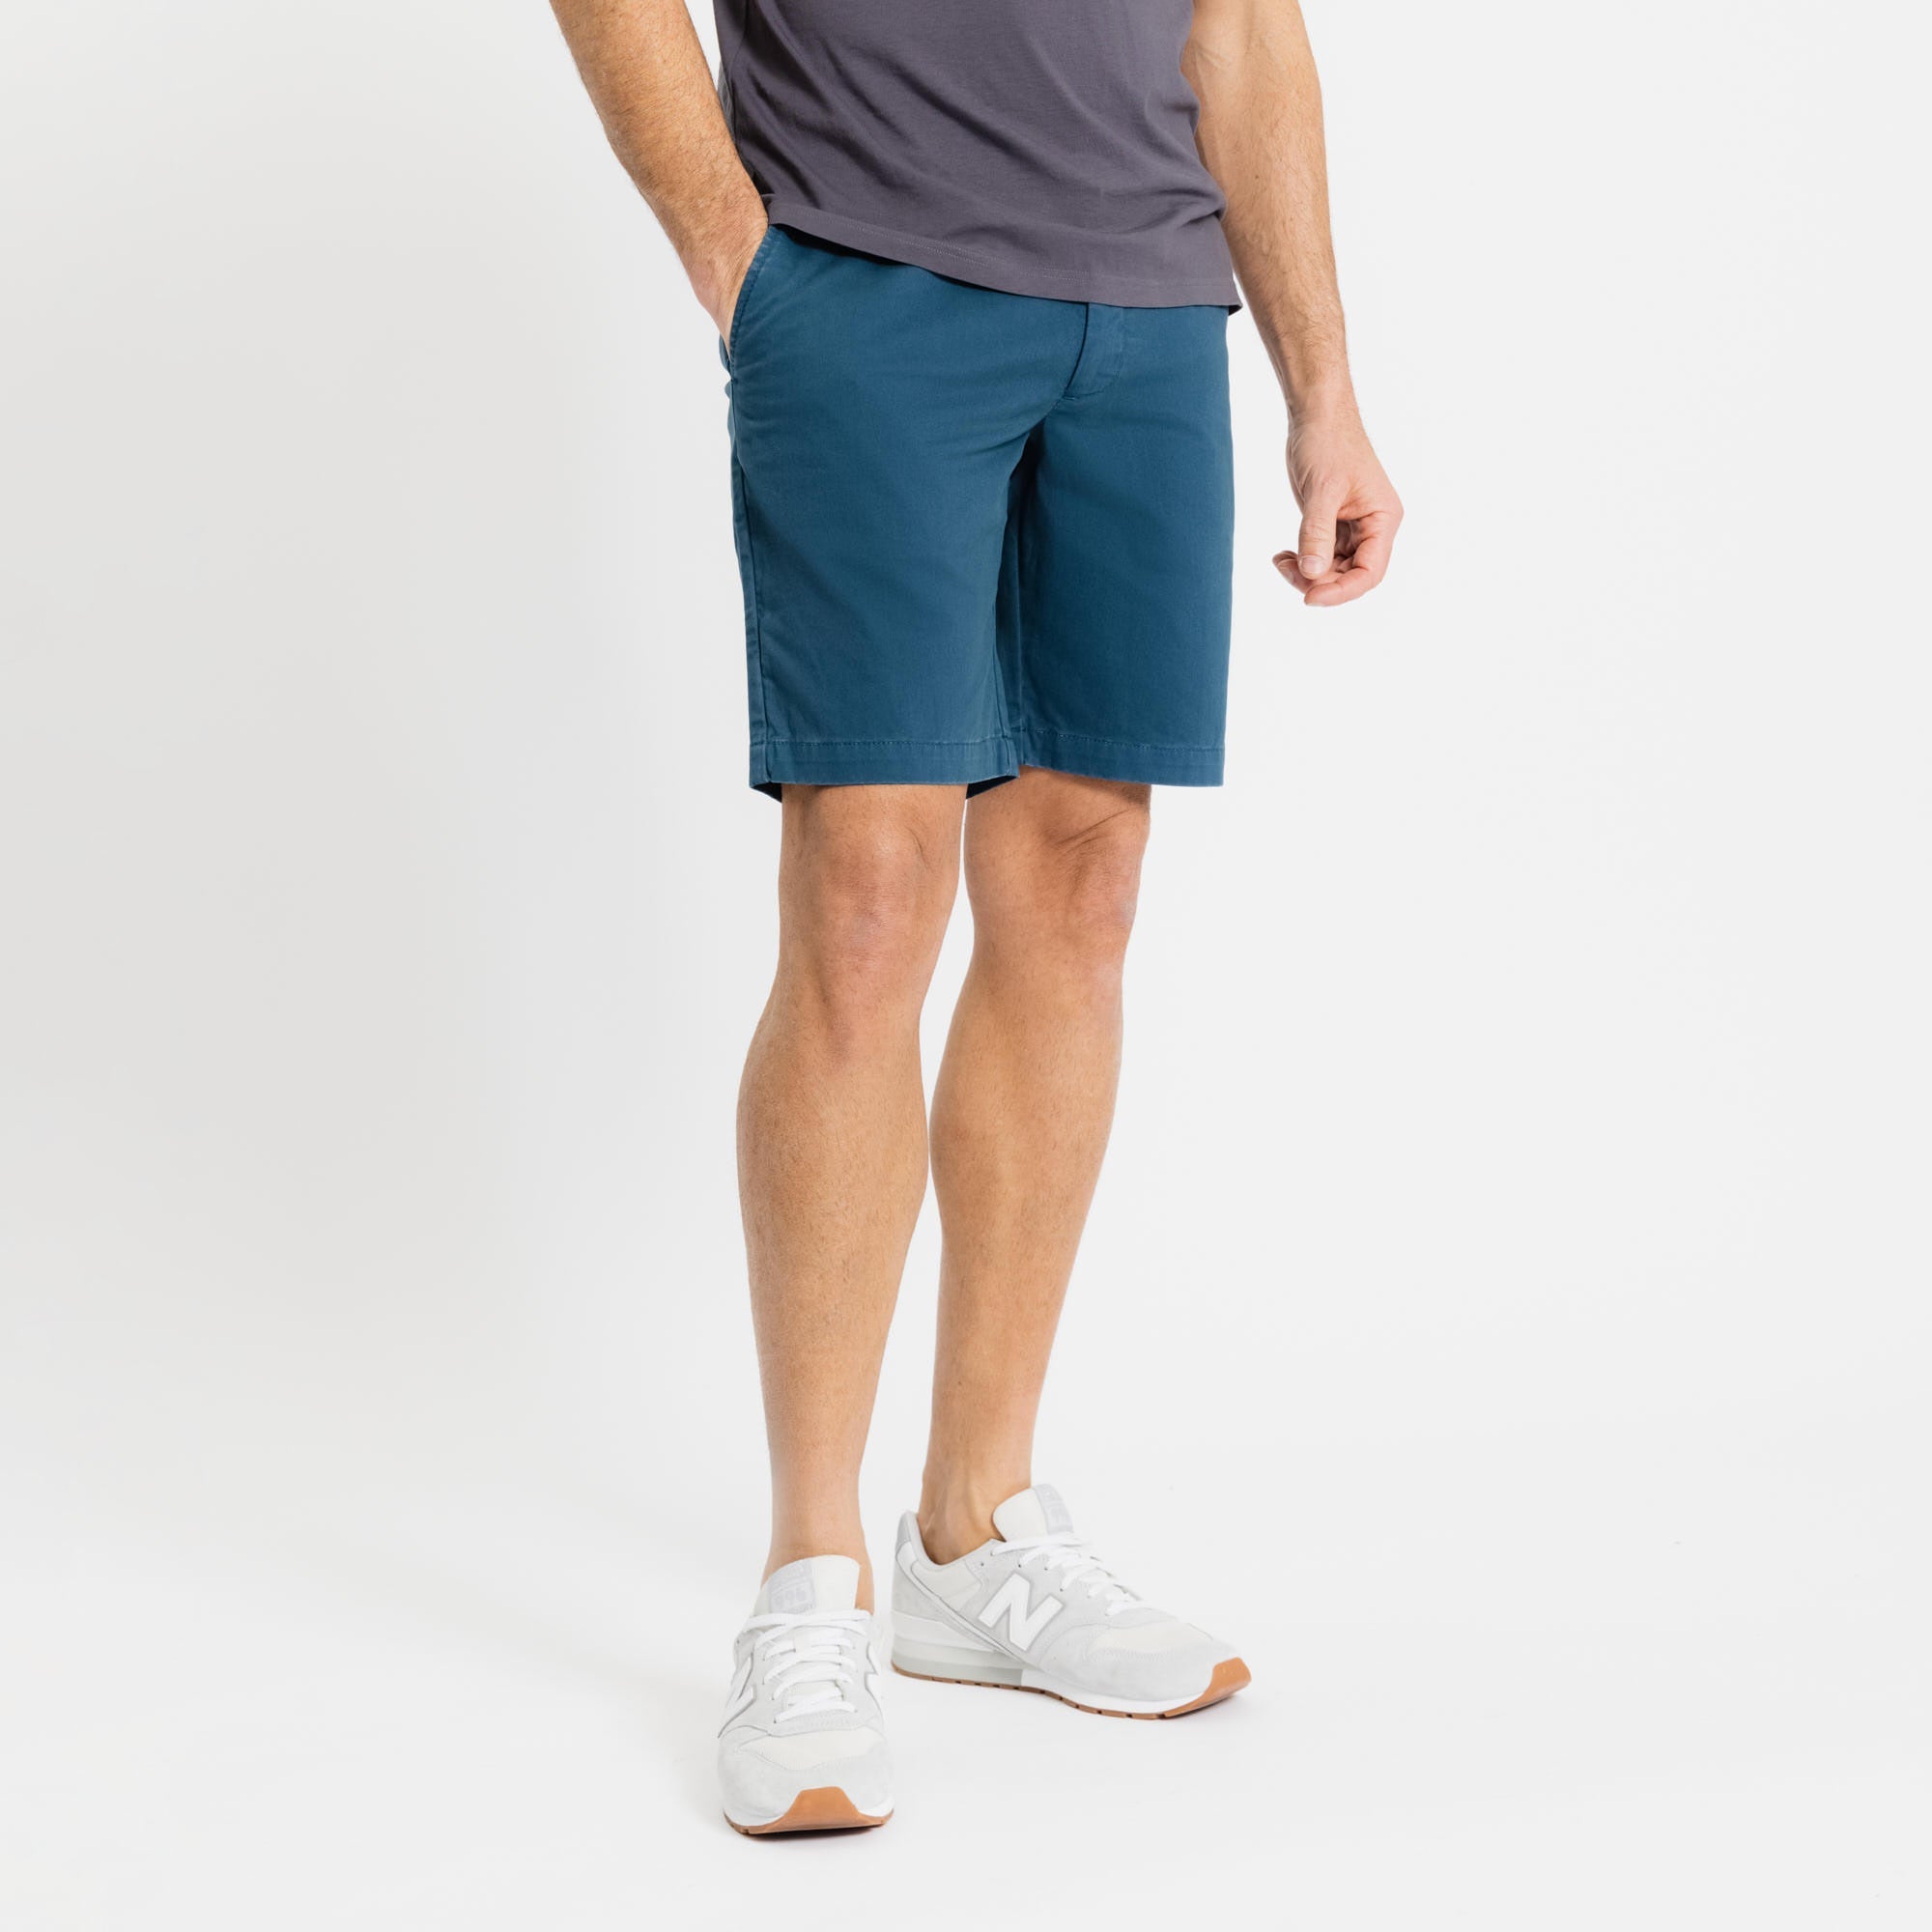 HOXTAN Solid Men Dark Blue Sports Shorts - Buy HOXTAN Solid Men Dark Blue  Sports Shorts Online at Best Prices in India